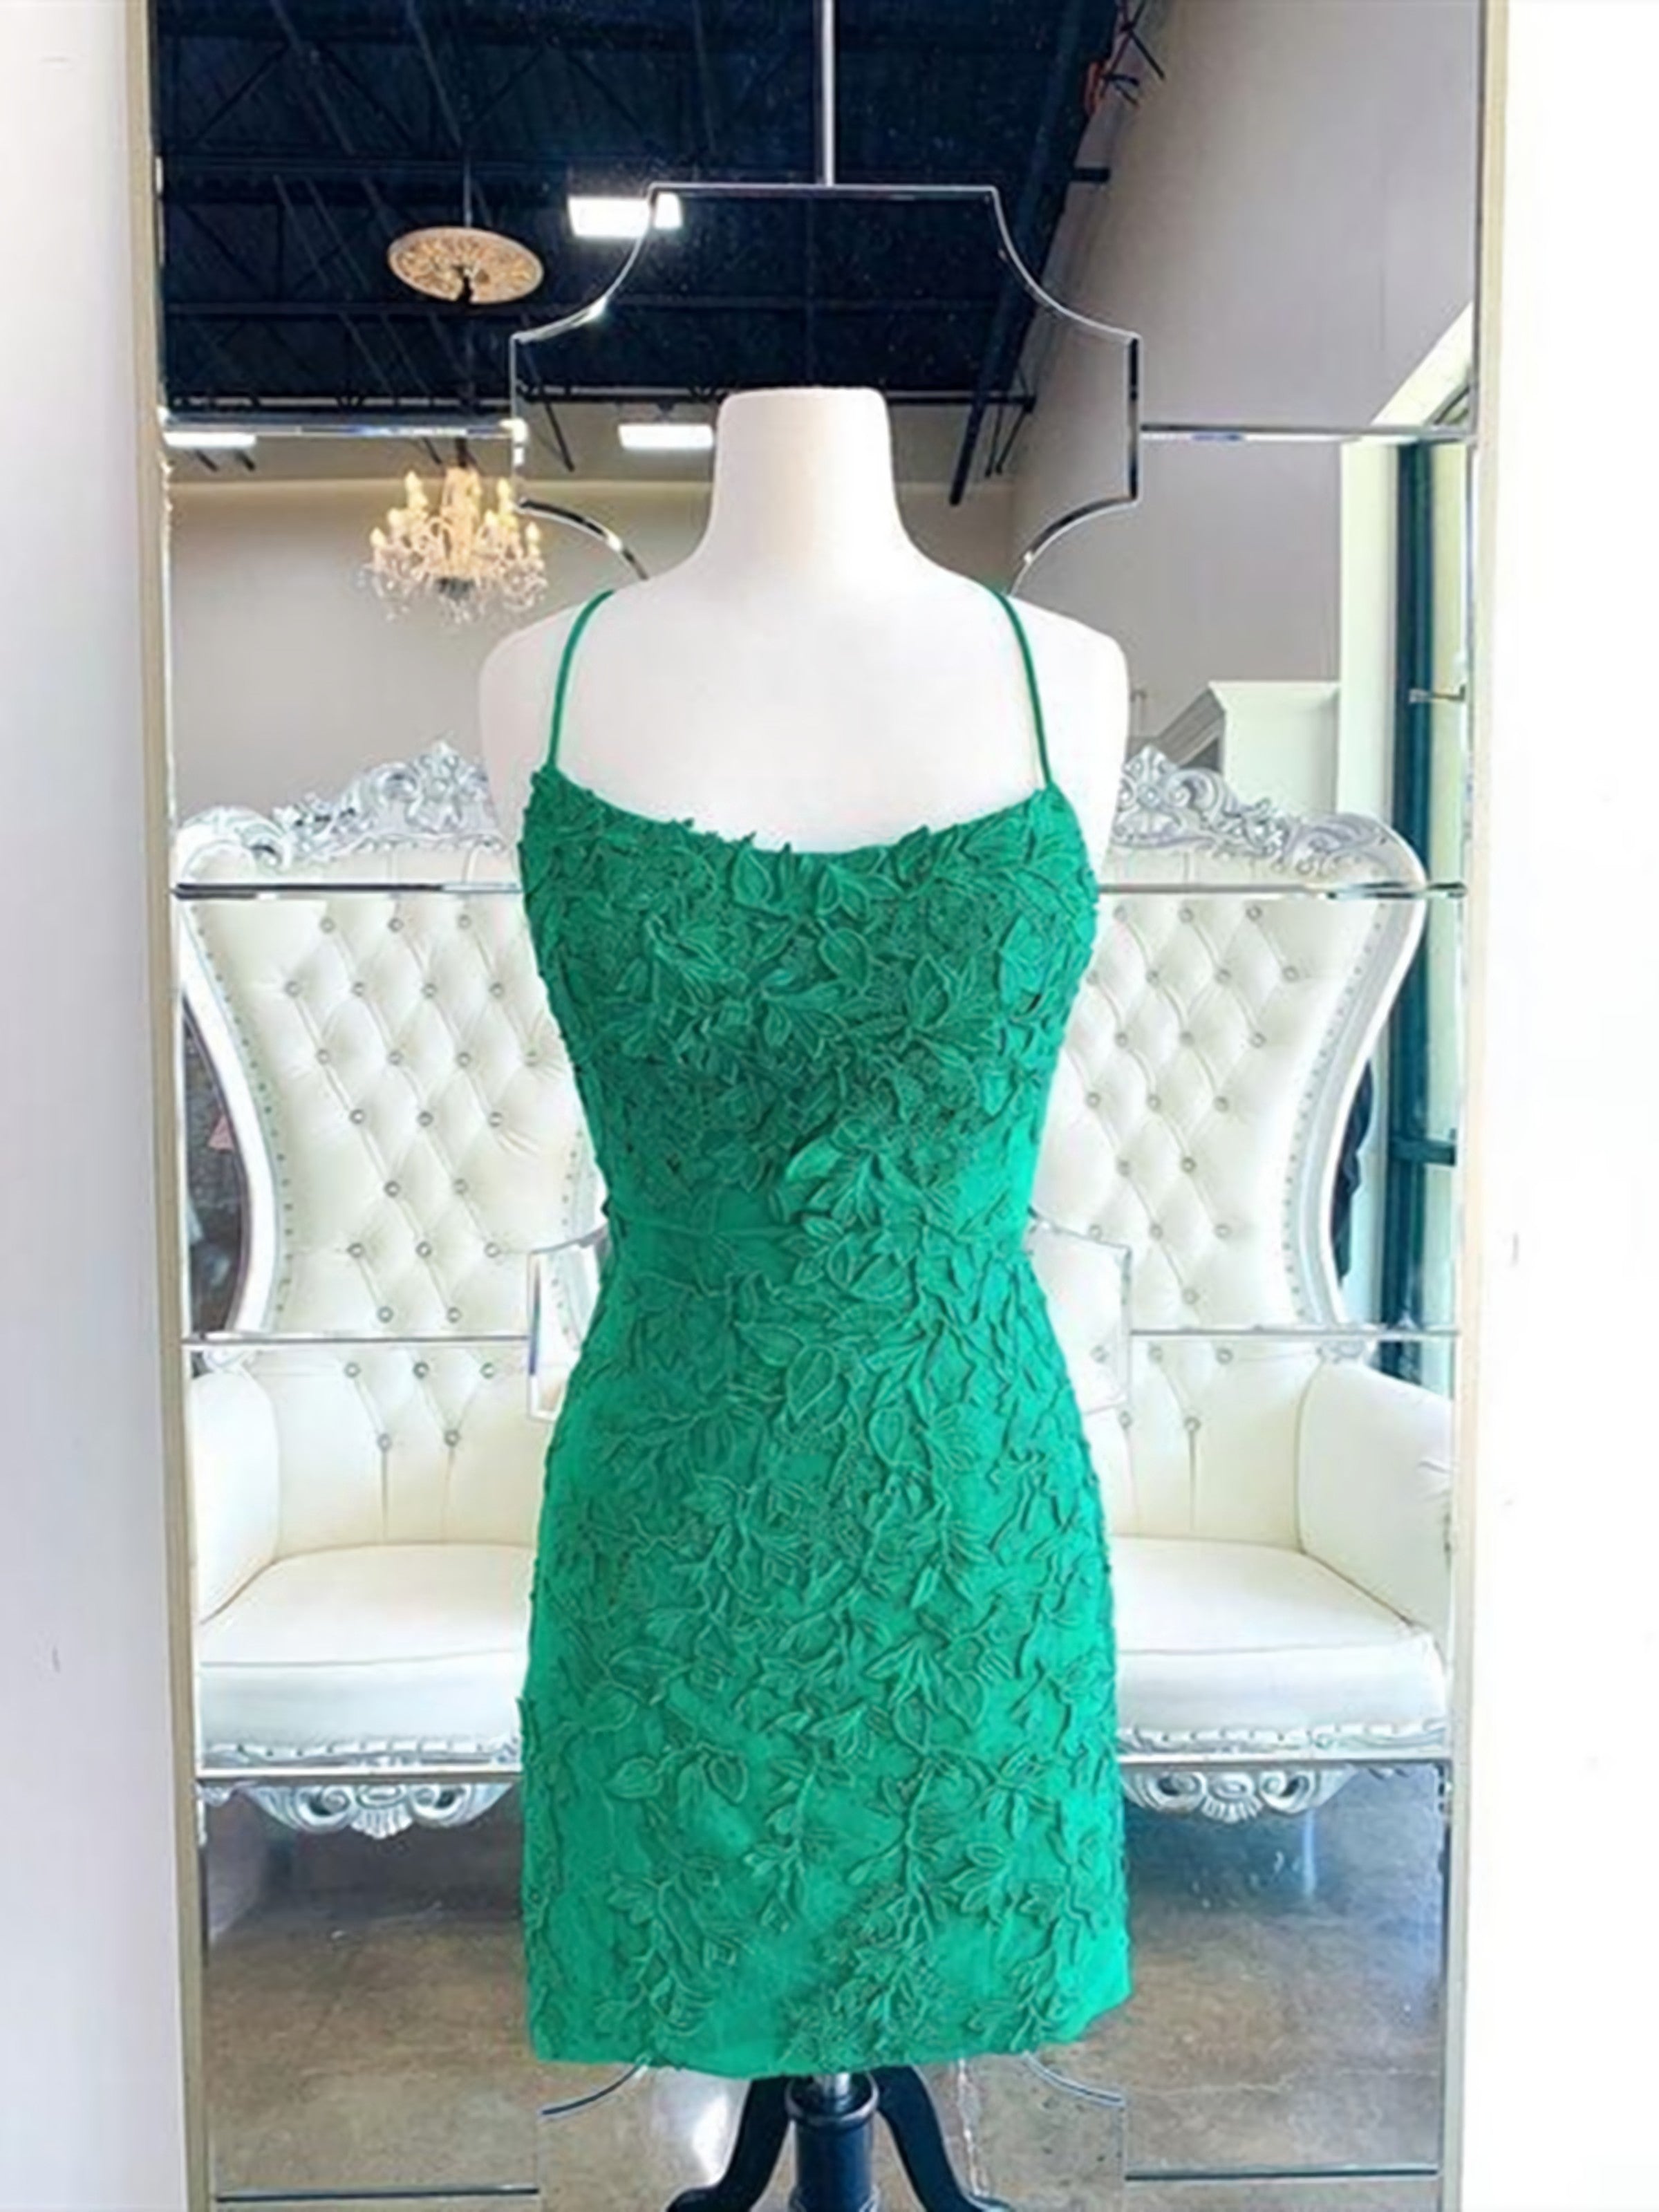 Backless Short Green Lace Prom Dresses Open Back Short Green Lace Homecoming Graduation Dresses